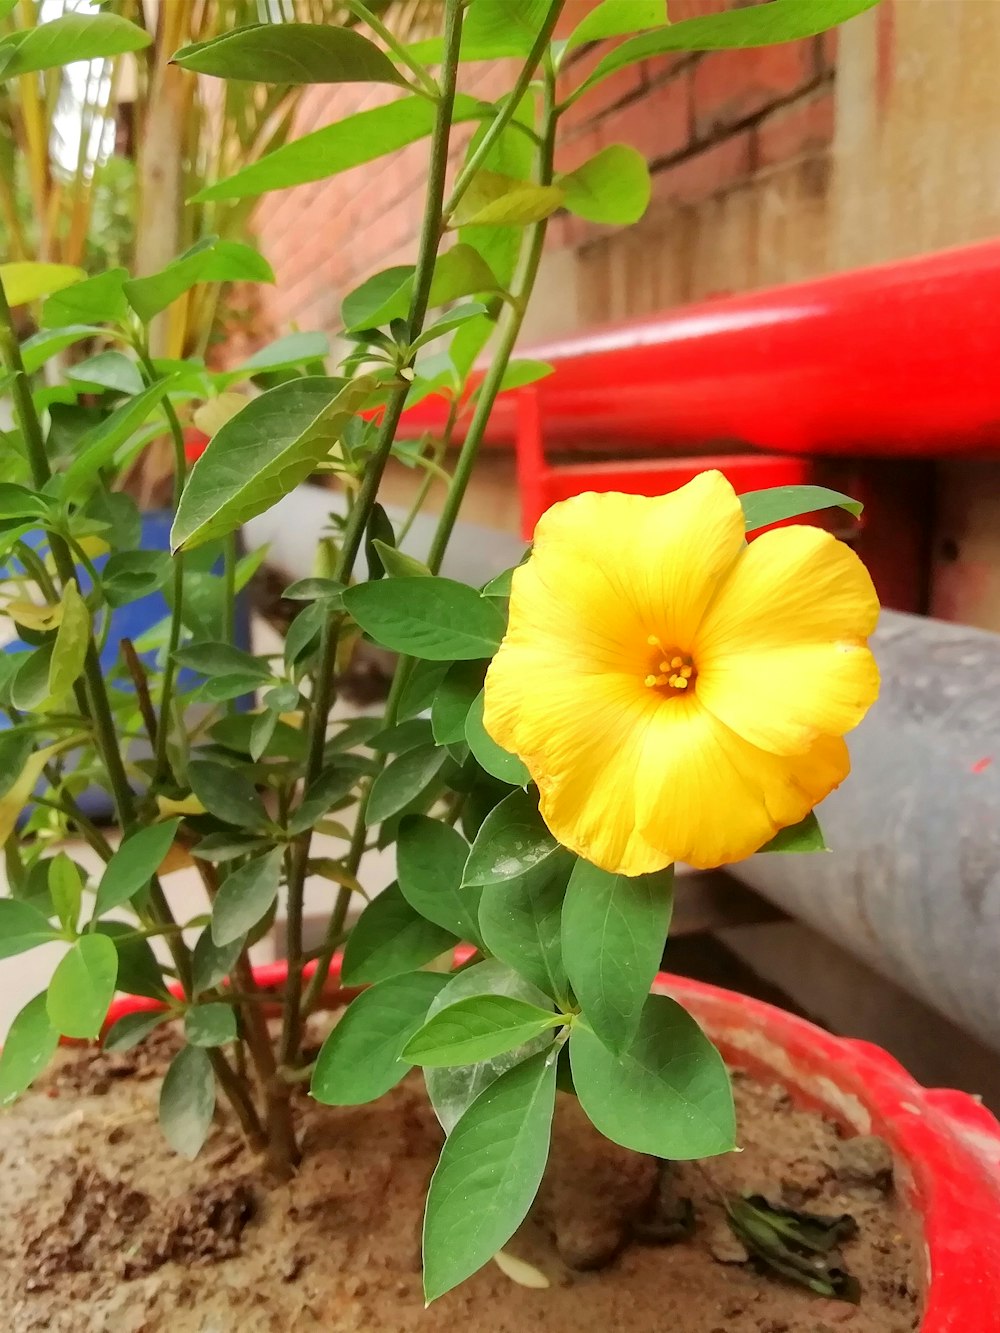 a yellow flower is in a red pot